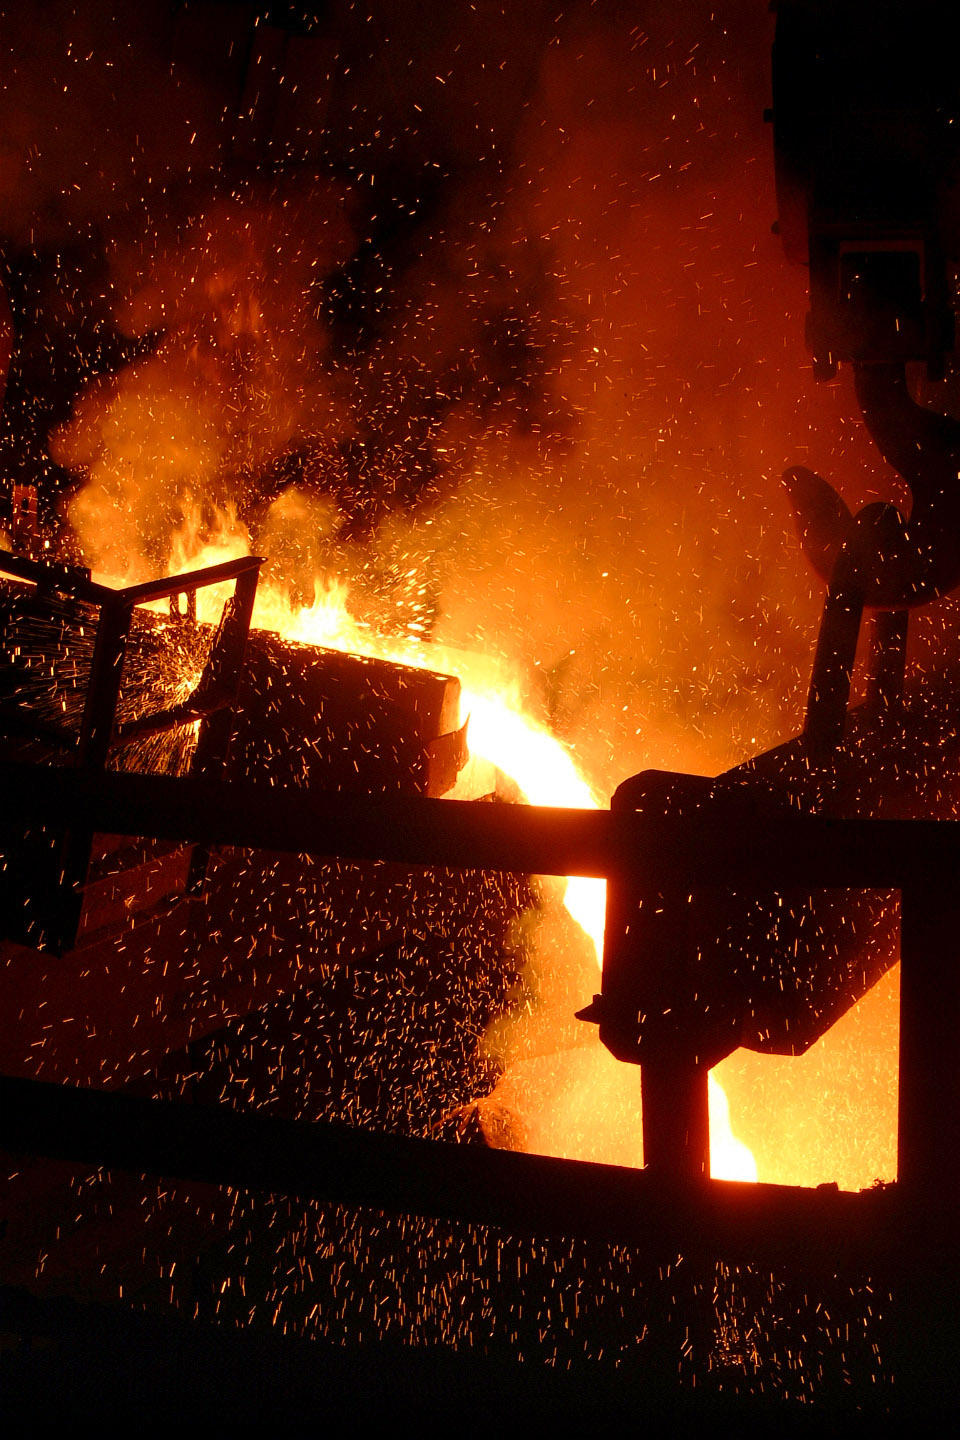 molten-steel-poured-into-kettle-at-foundry.jpg